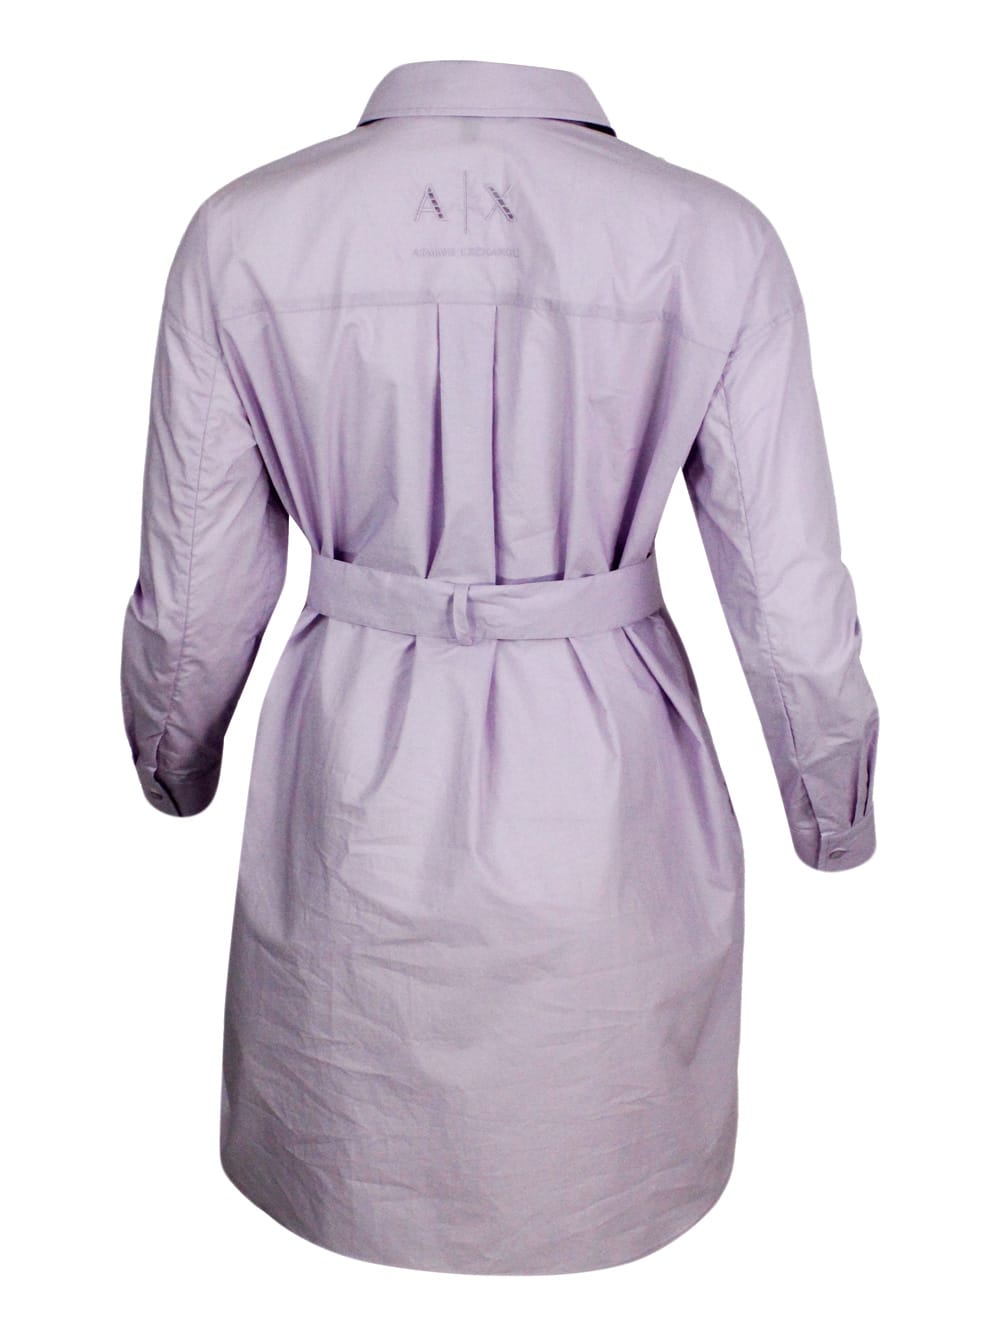 Shop Armani Collezioni Dress Made Of Soft Cotton With Long Sleeves, With Button Closure On The Front And Belt. In Pink